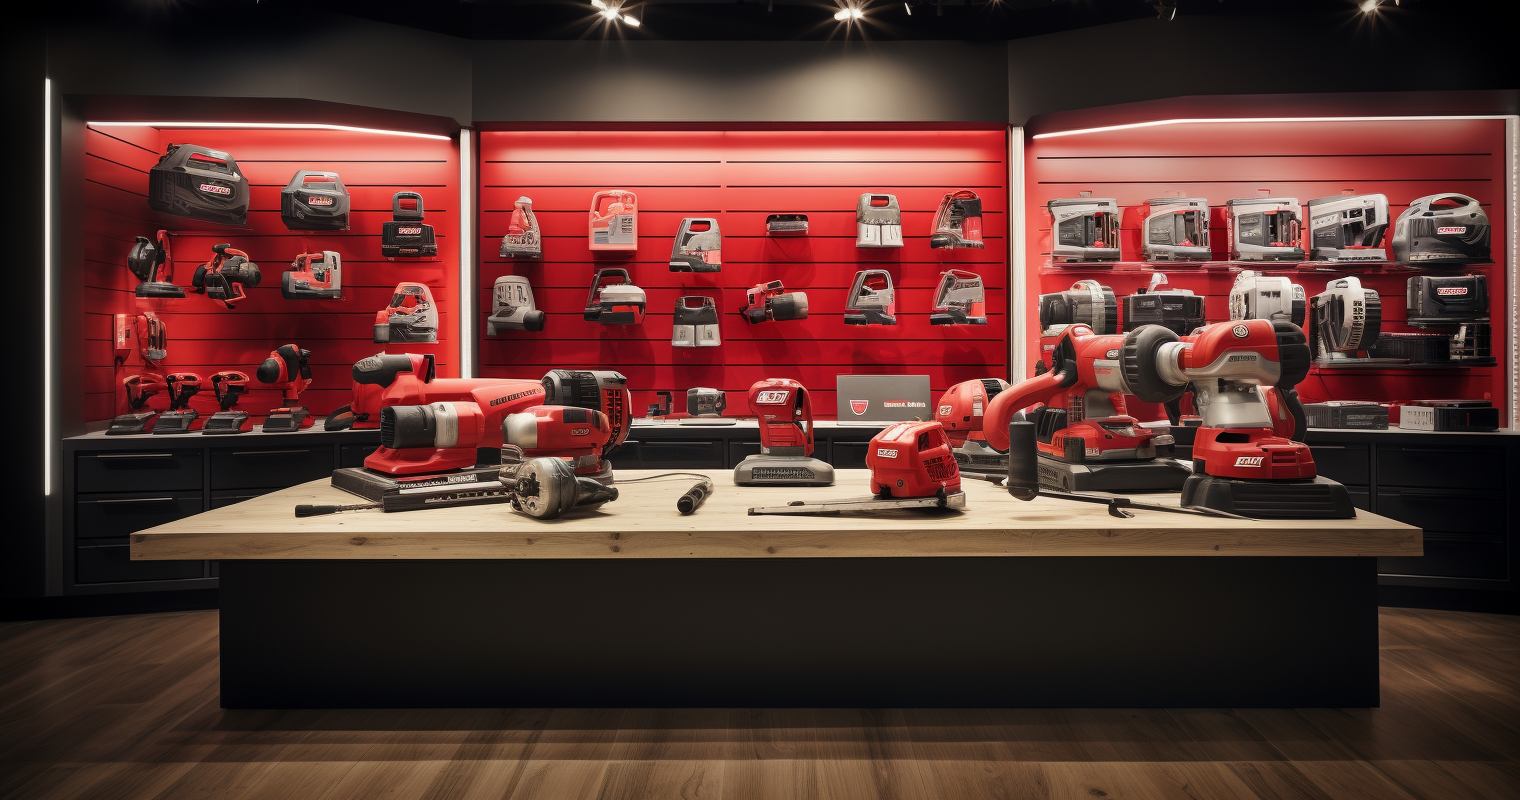 Ego Power Tools Store Display